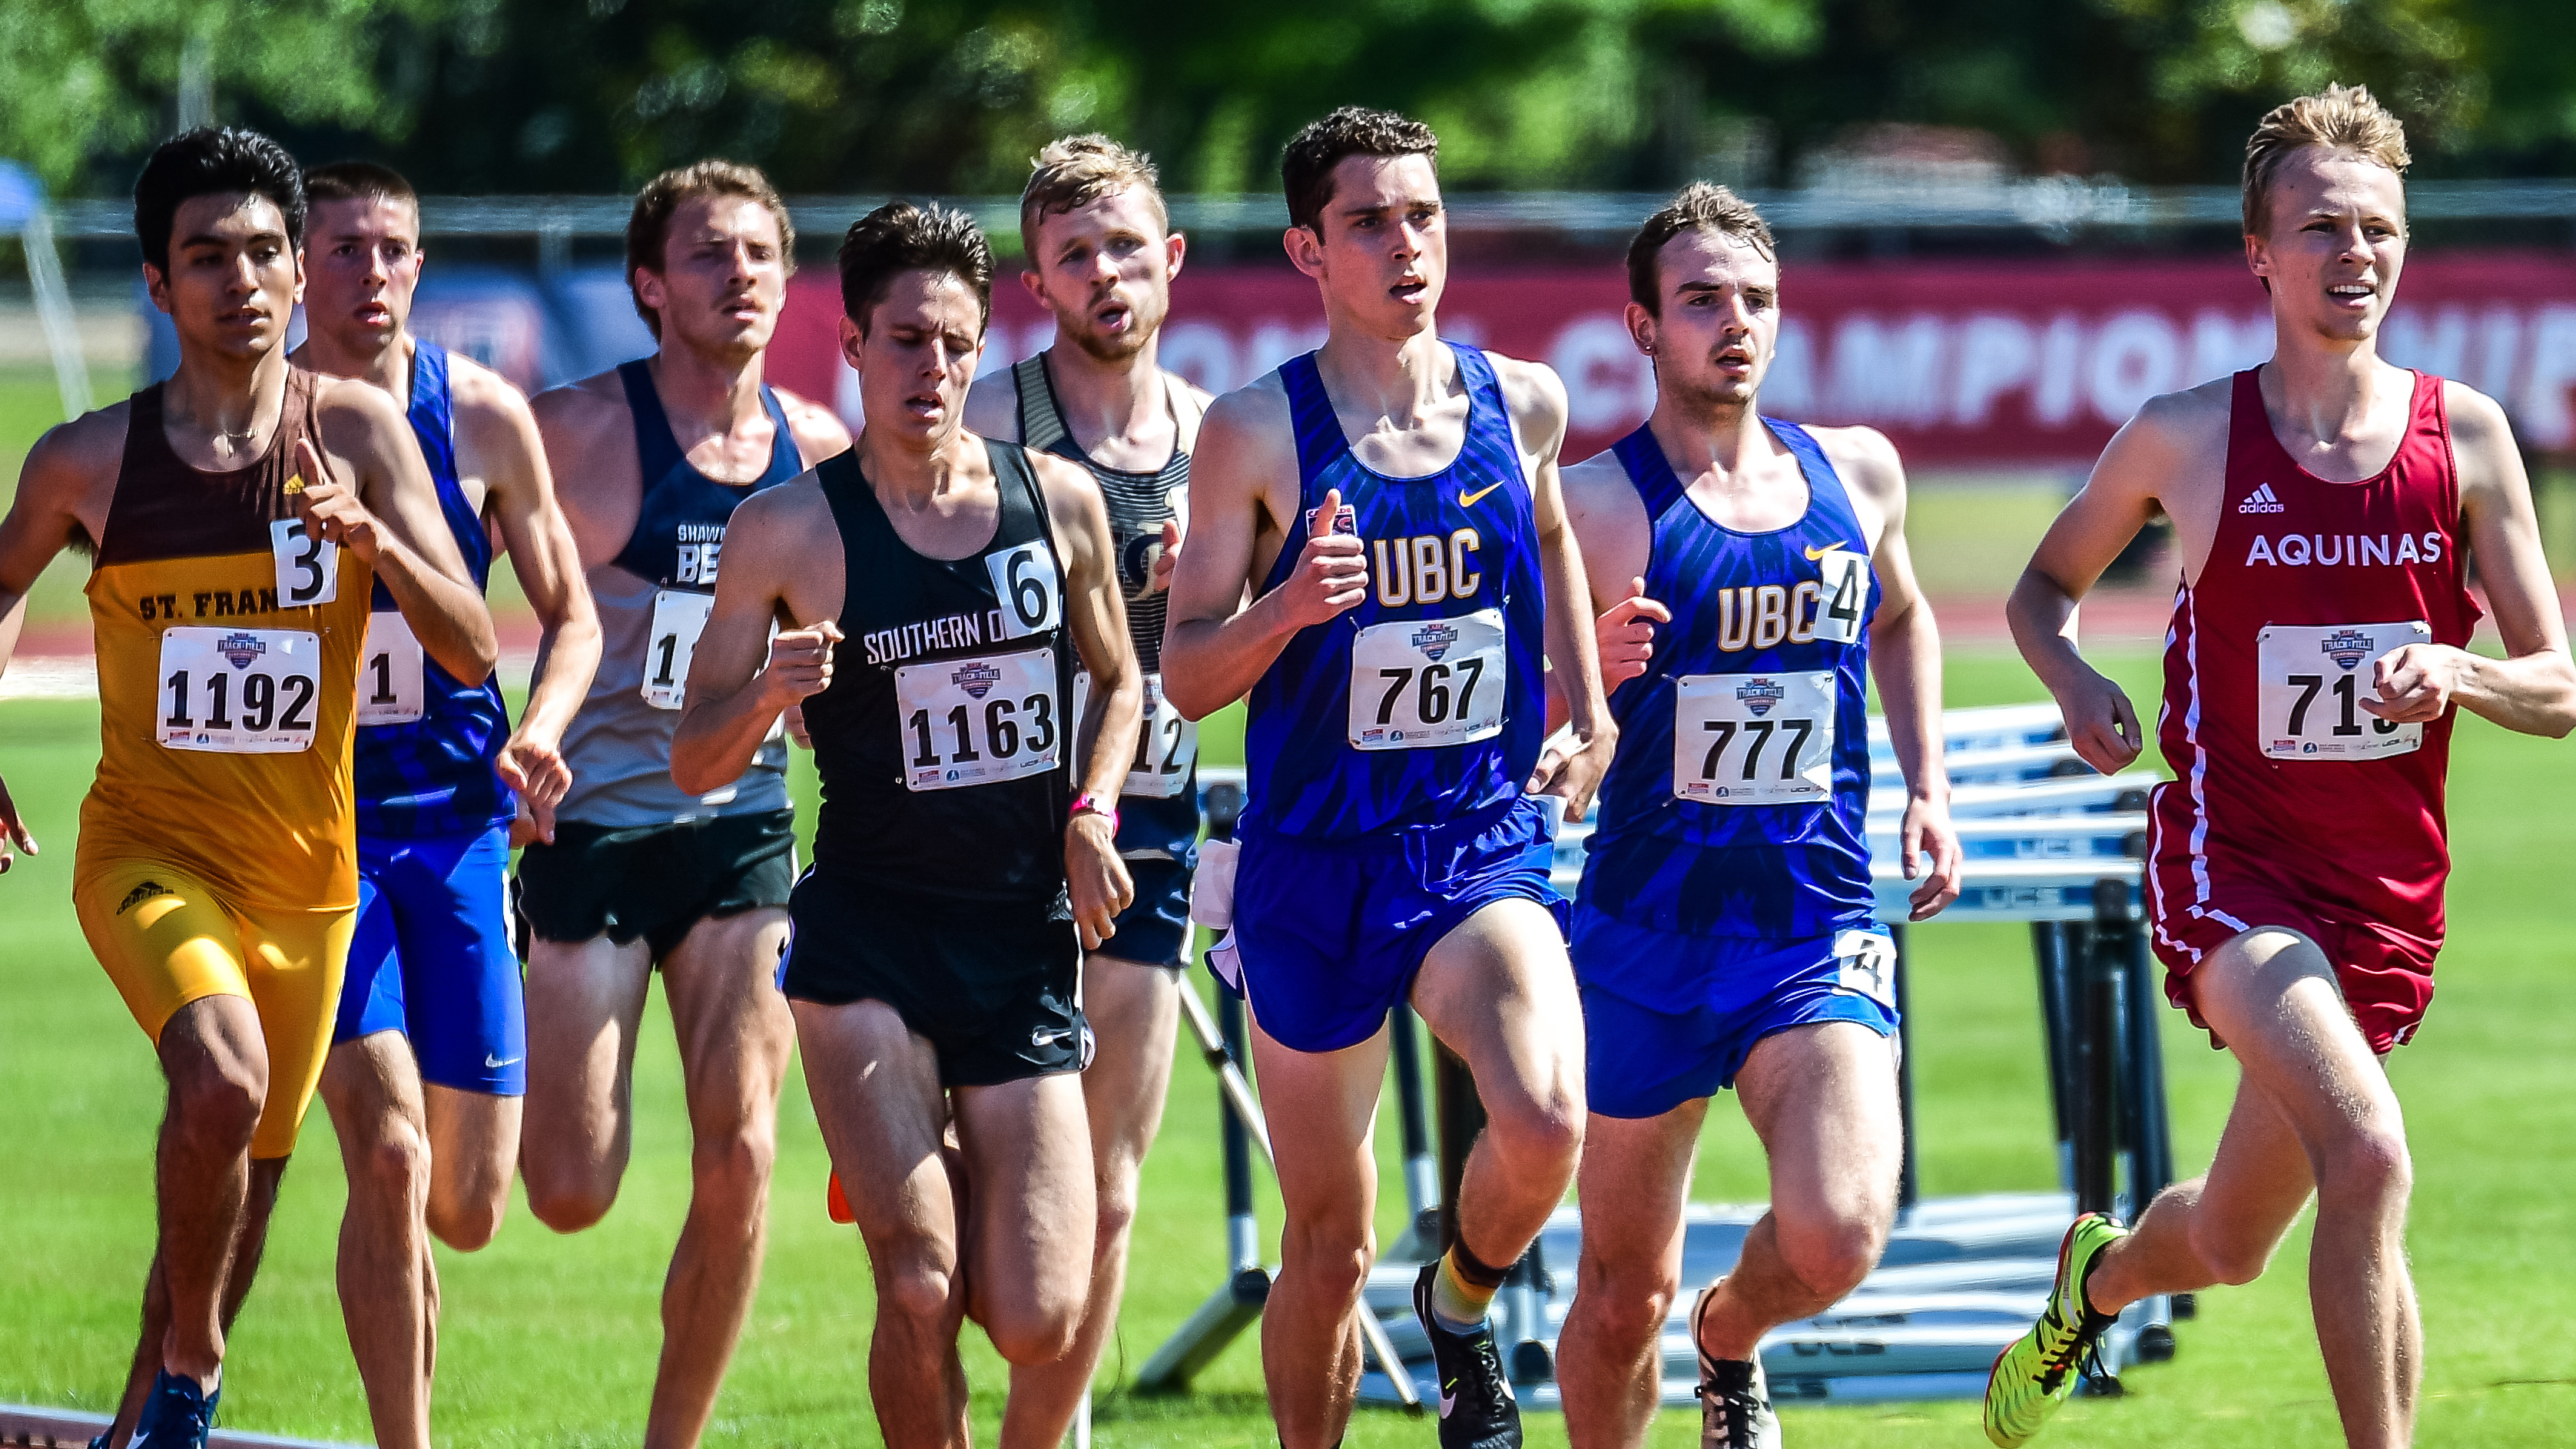 Day 1 - 2019 Men's Outdoor Track & Field Championship